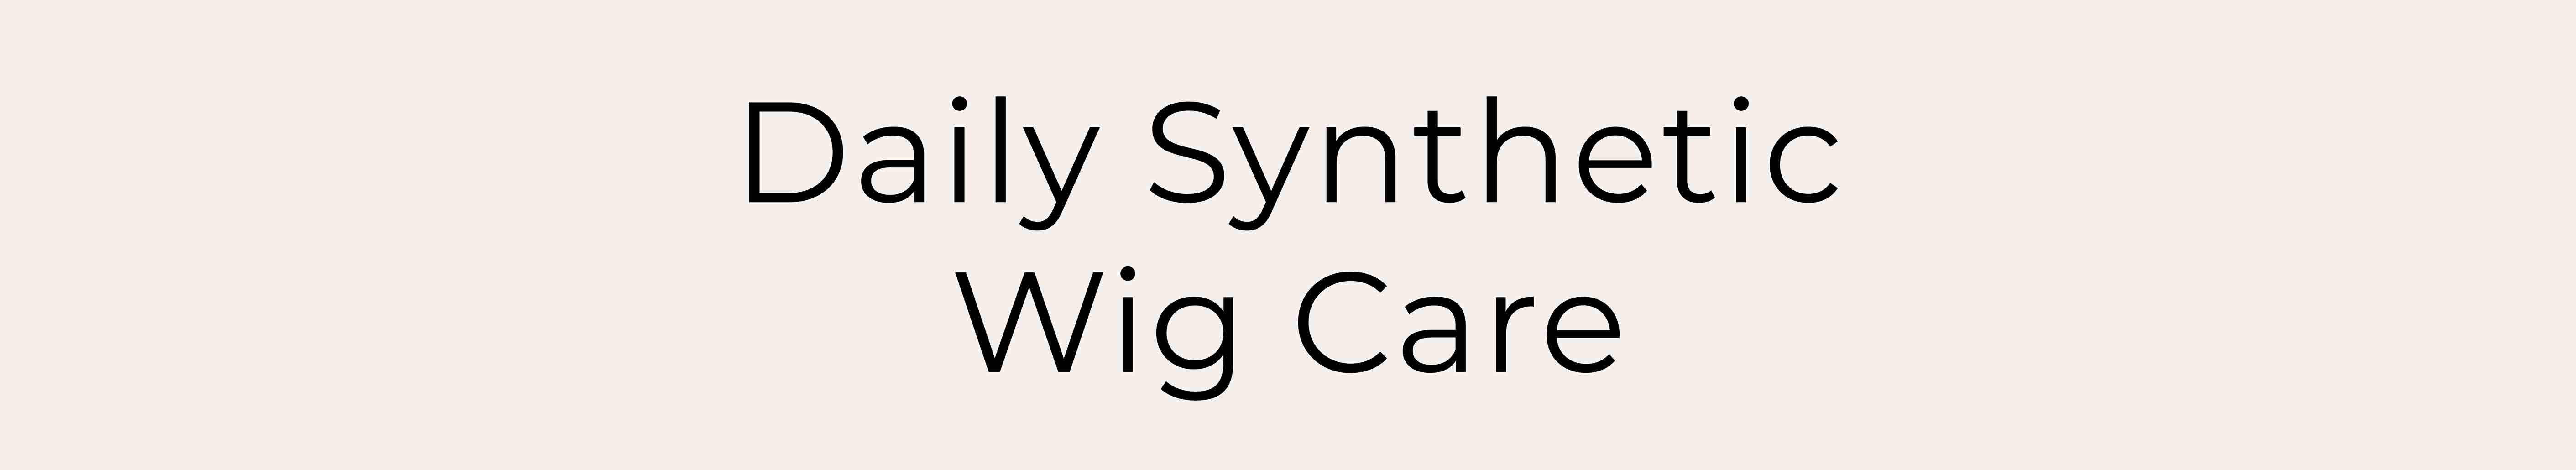 Daily Synthetic Wig Care